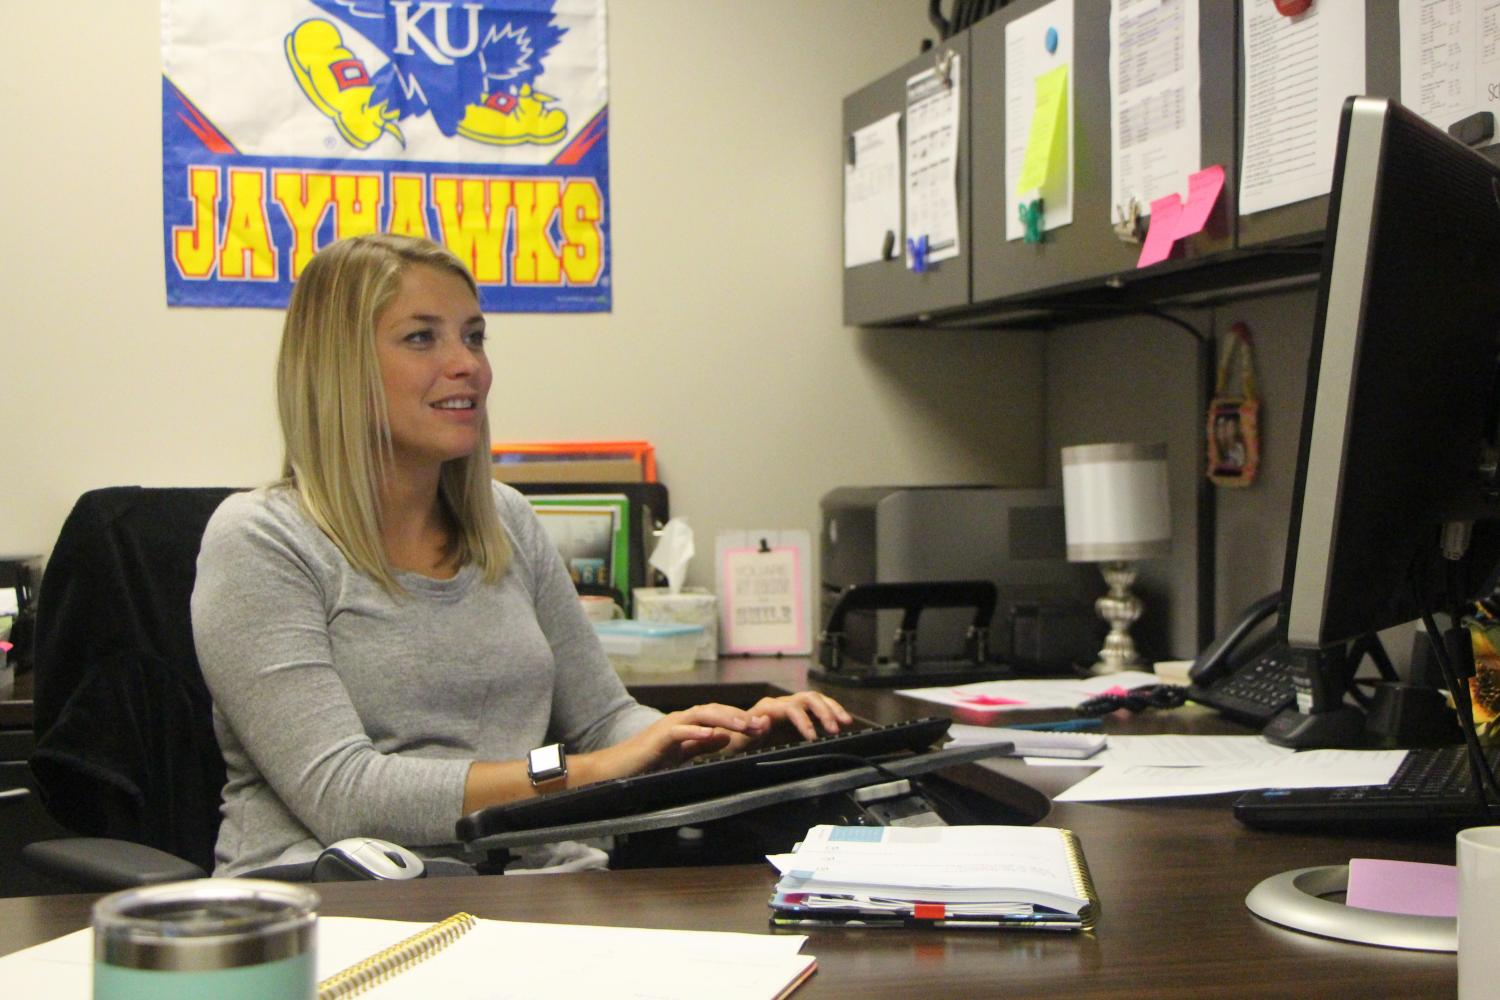 School interventionist Megan Geenens sits at her desk in her new office. My favorite part about being an interventionist is being able to work closely with students who need academic help, Geenens said.